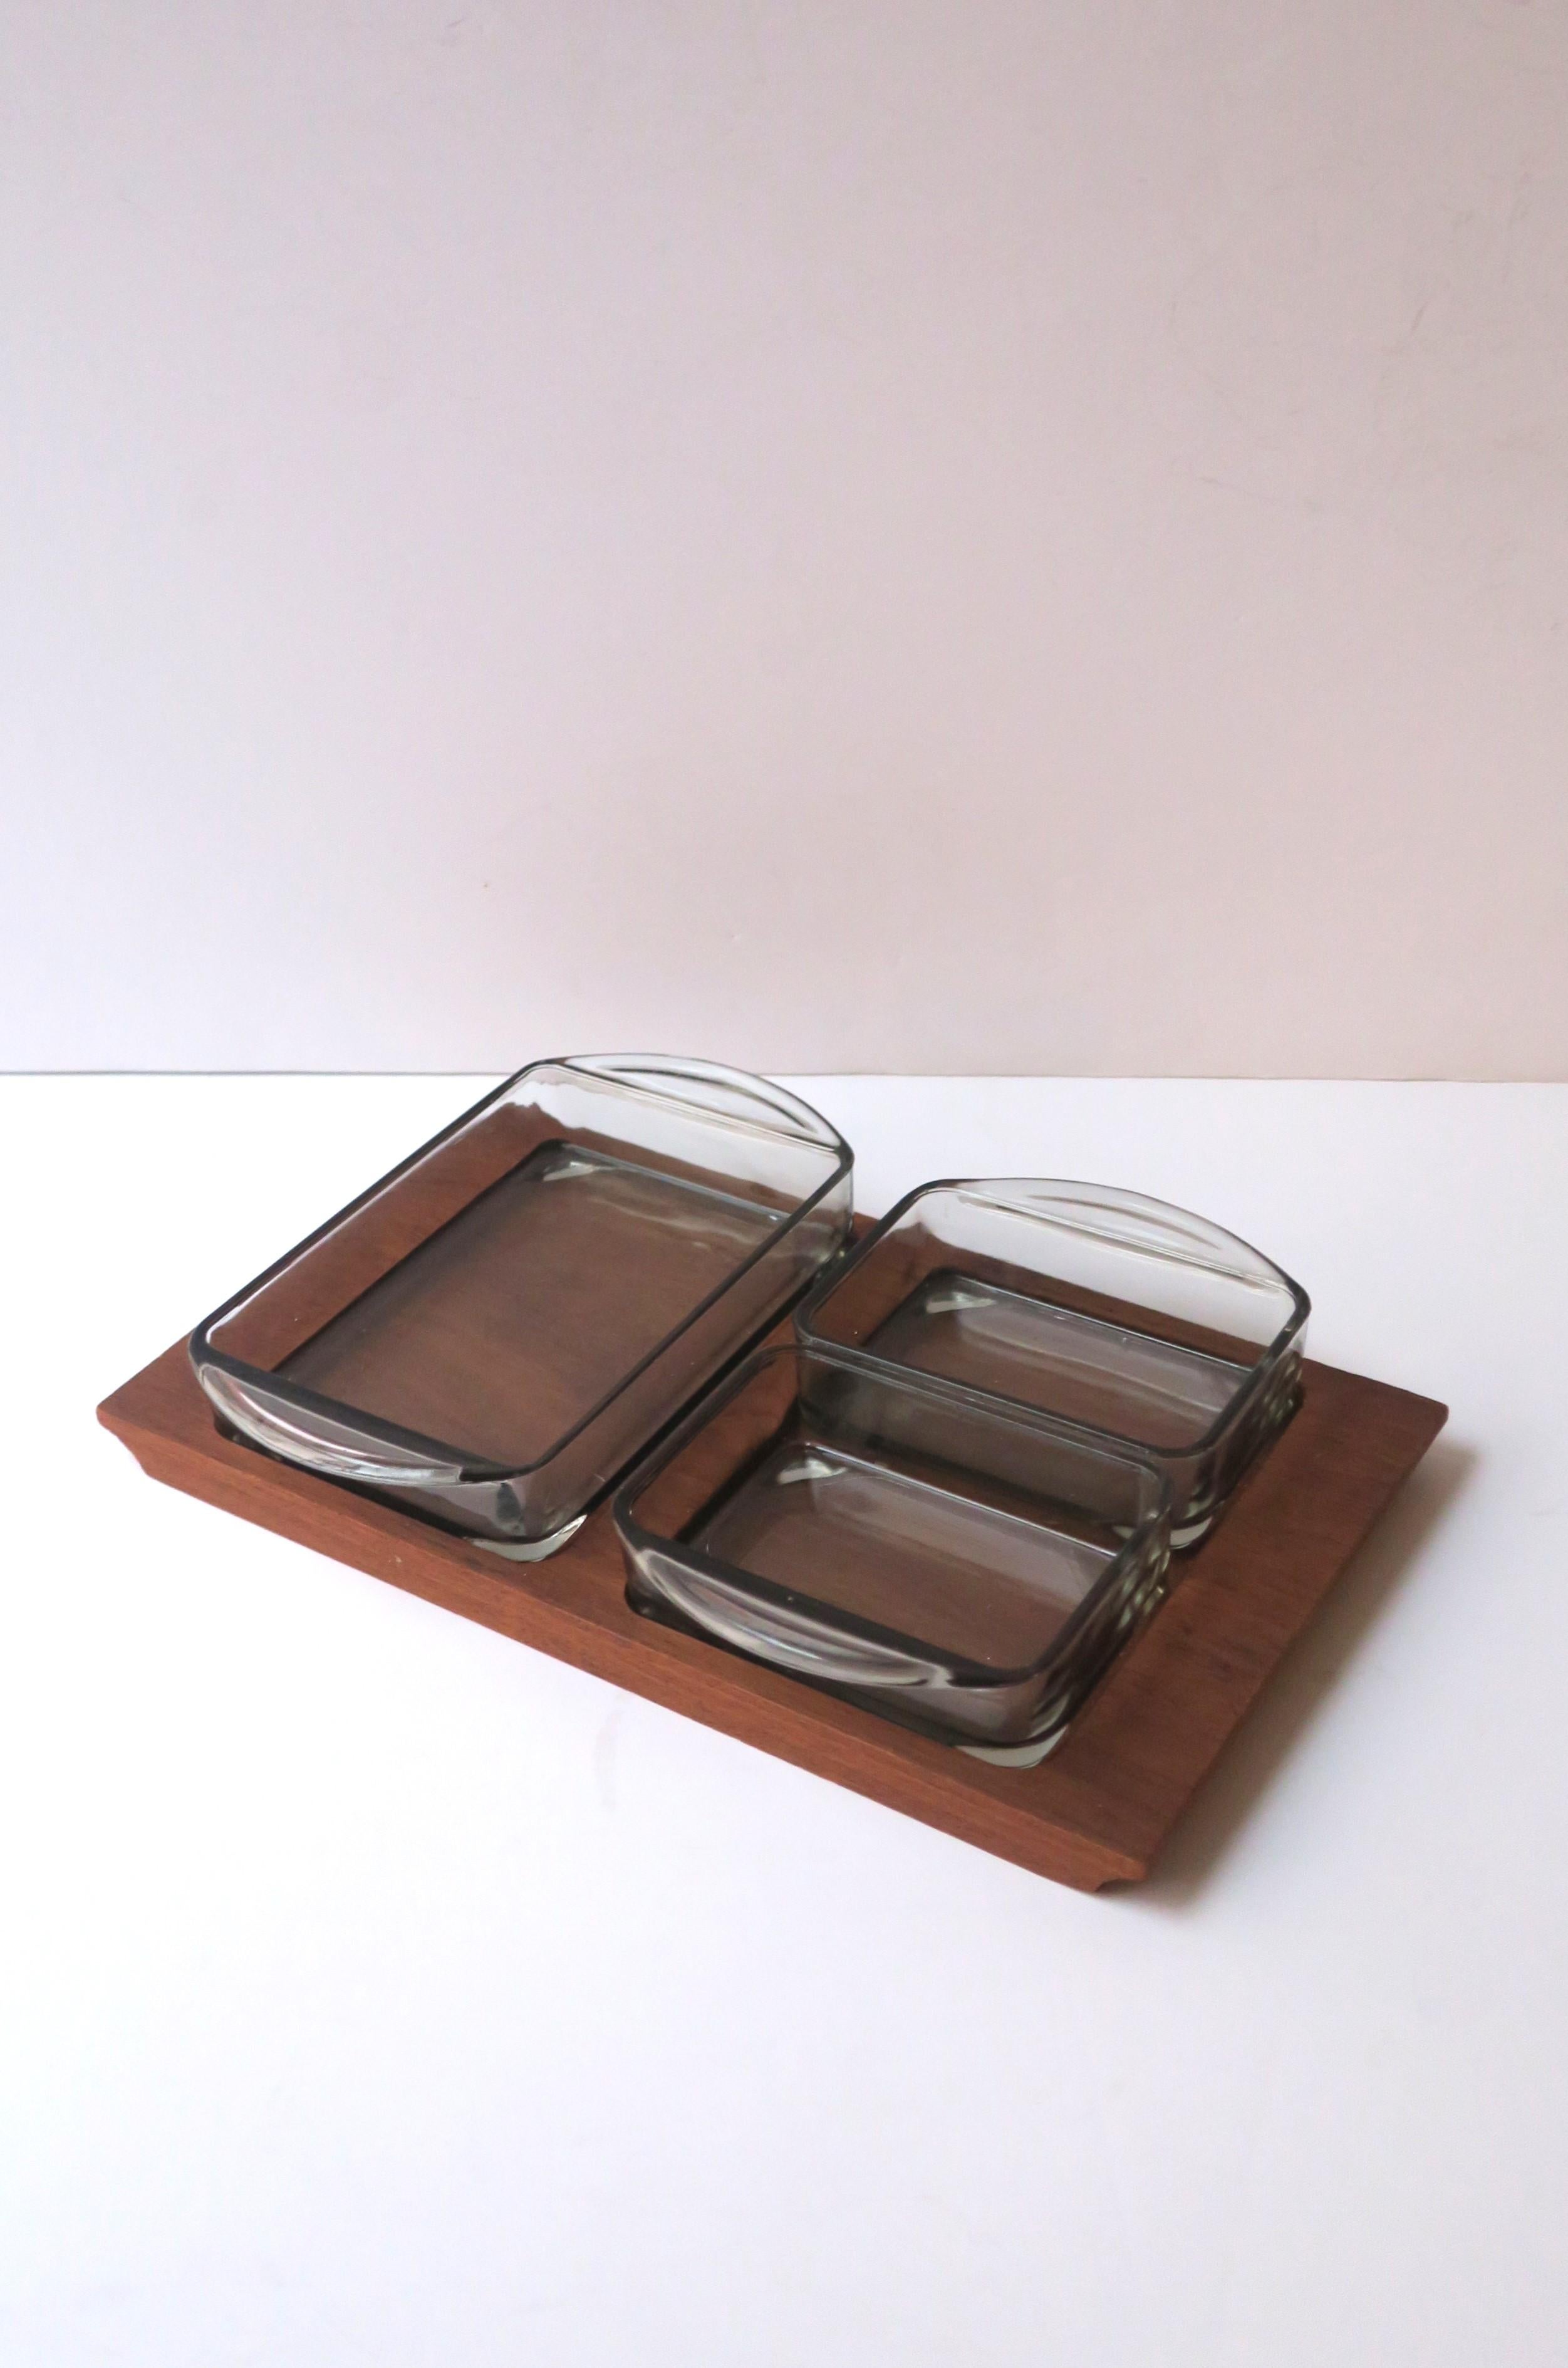 A wood and glass serving dish with three compartments, Midcentury Danish Modern or Scandinavia Modern design period, circa mid-20th century, Denmark. Piece has a wood base with three glass dishes in a light smoked blue hue, each glass dish has a lip